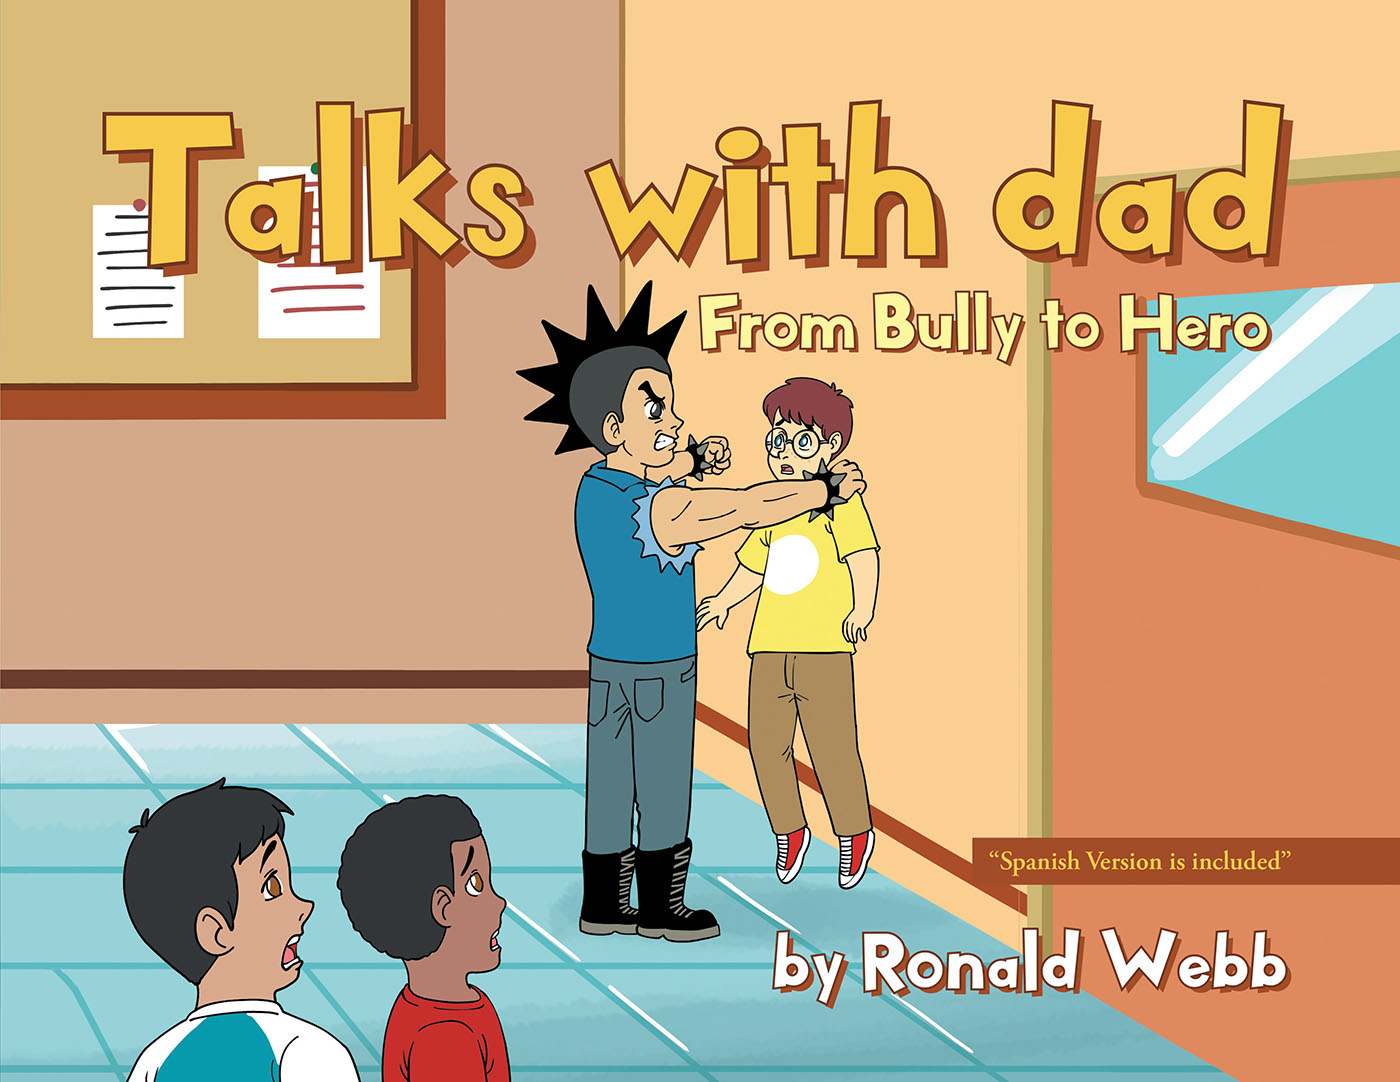 Author Ronald Webb’s New Book, "Talks with Dad: From Bully to Hero," is a Heartfelt Story of a Young Bully Who Begins Making Important Choices to Turn His Life Around